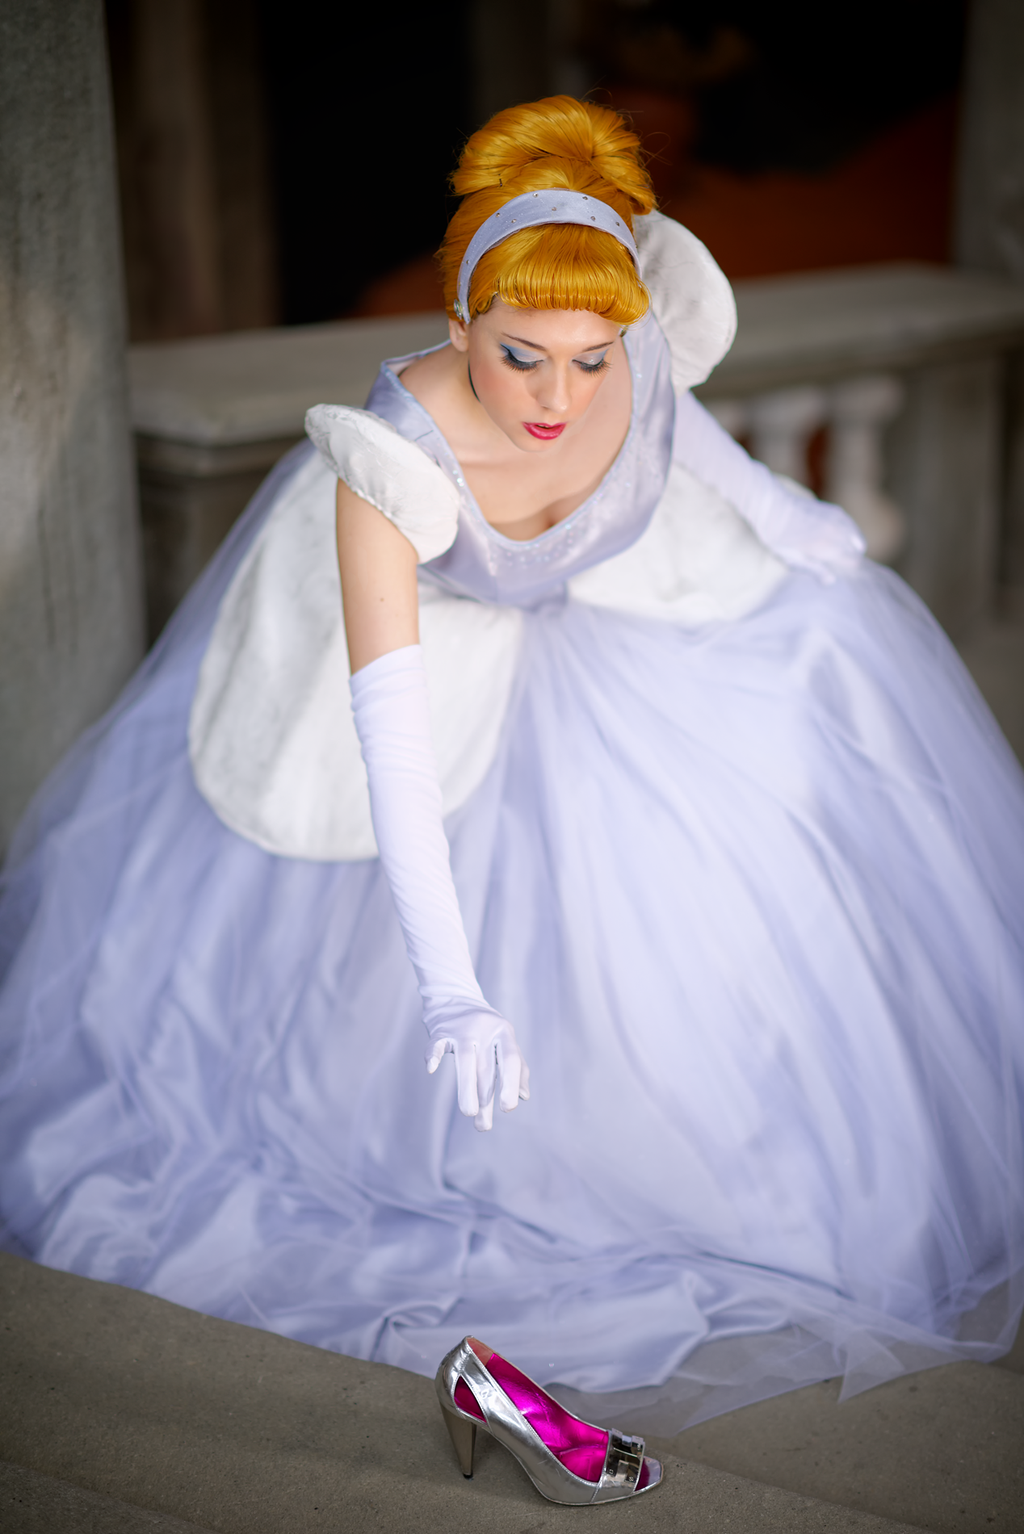 If you decided to make a Cinderella cosplay, which of her